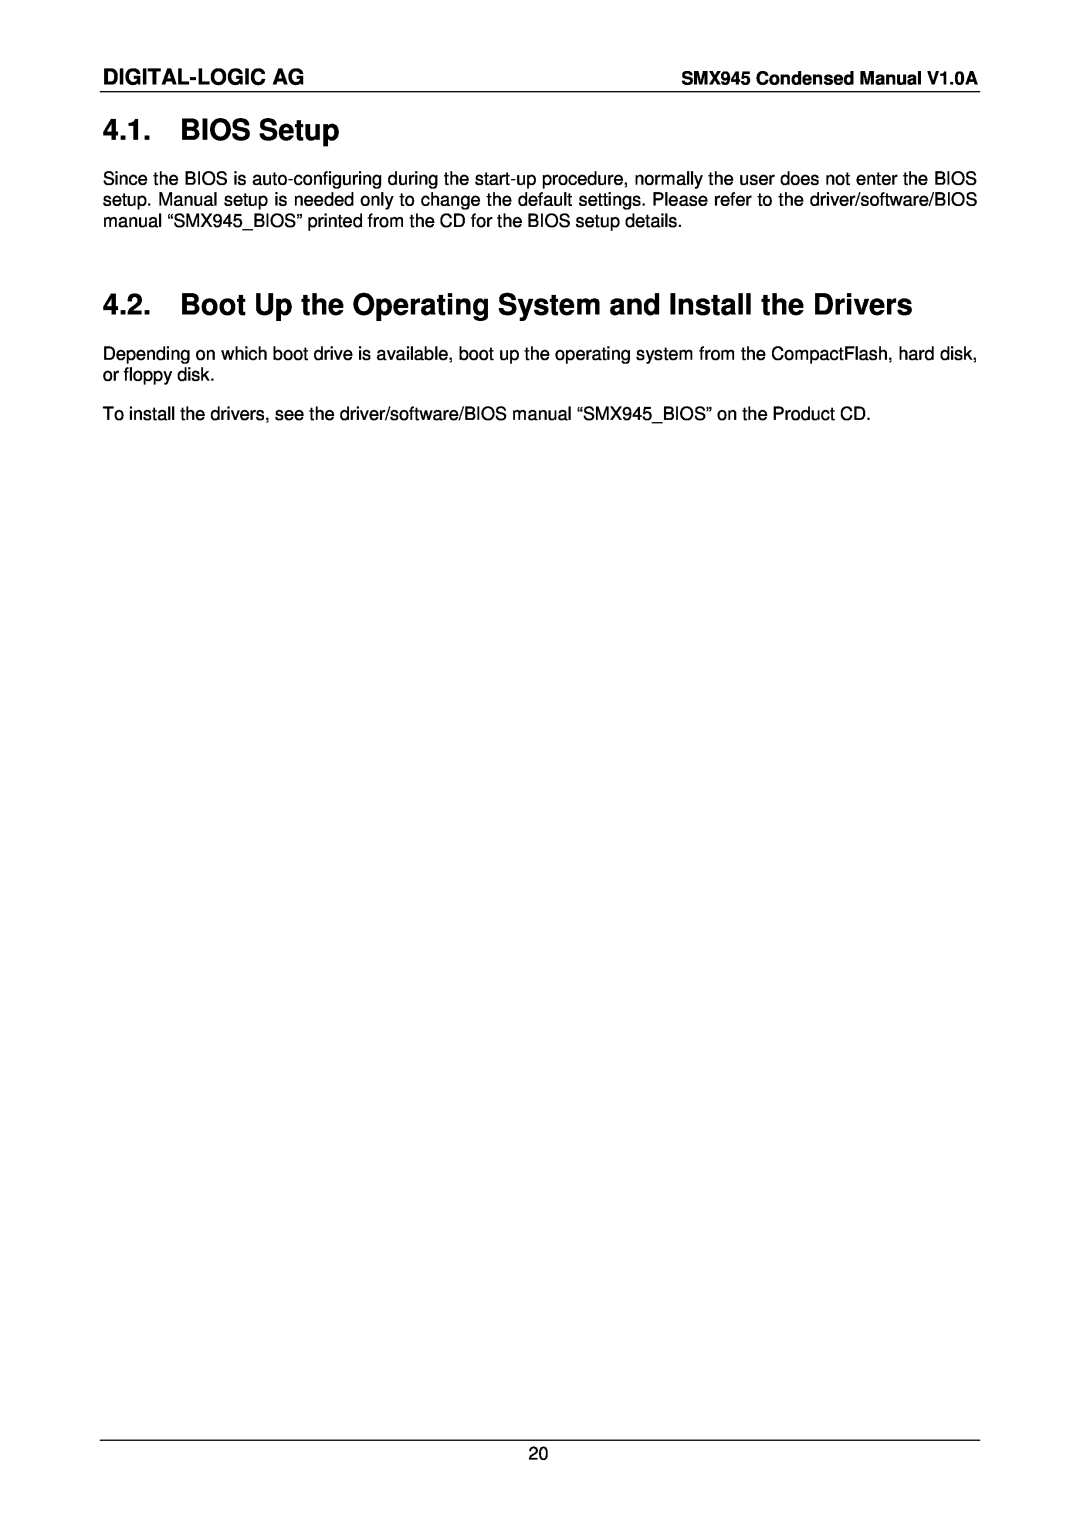 Compaq SMX945 user manual BIOS Setup, Boot Up the Operating System and Install the Drivers, Digital-Logic Ag 